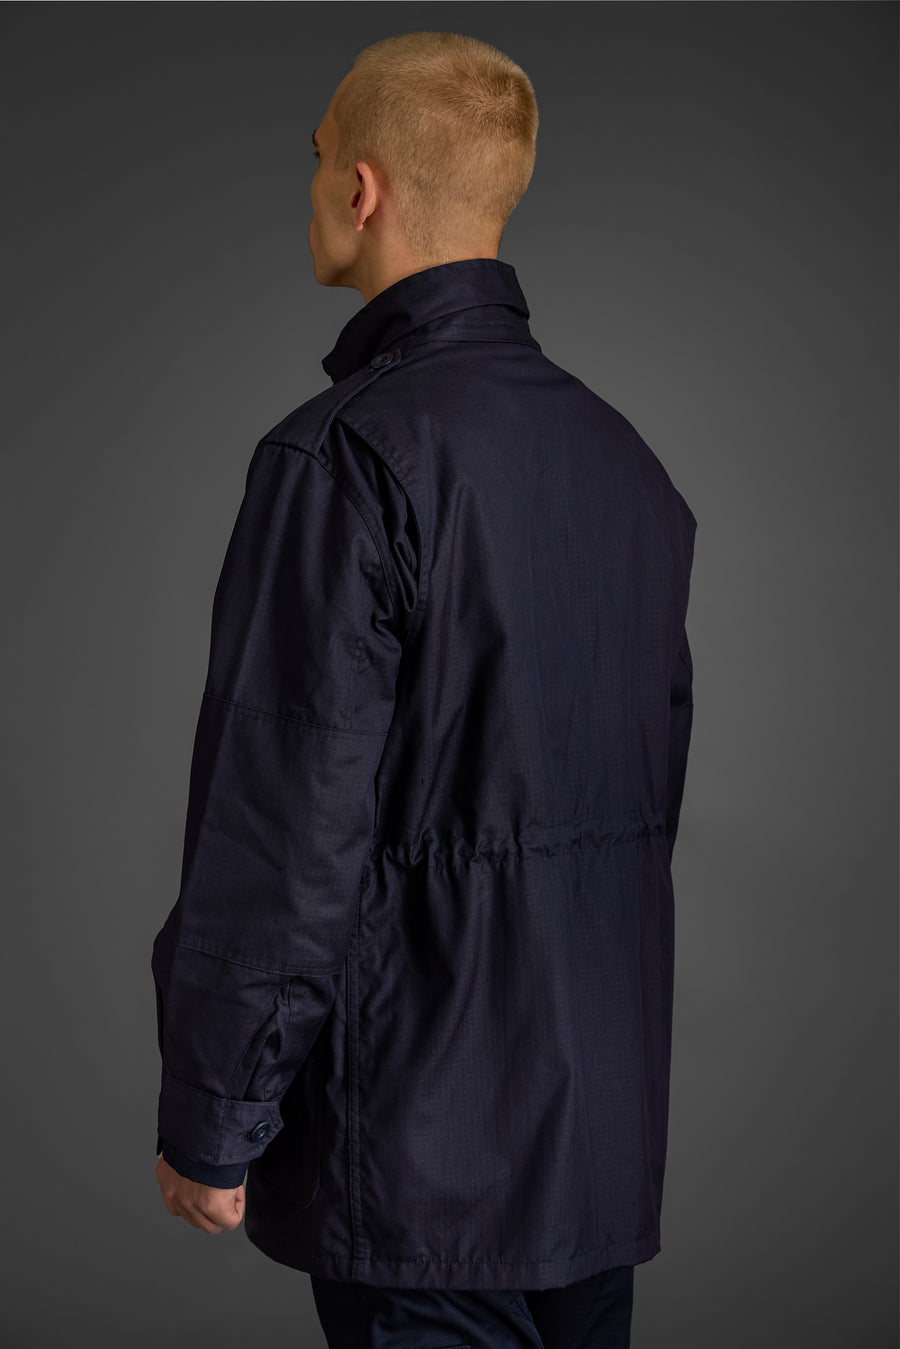 Multi Functional - Dark Blue BDU with Field Jacket designed for Public Security forces